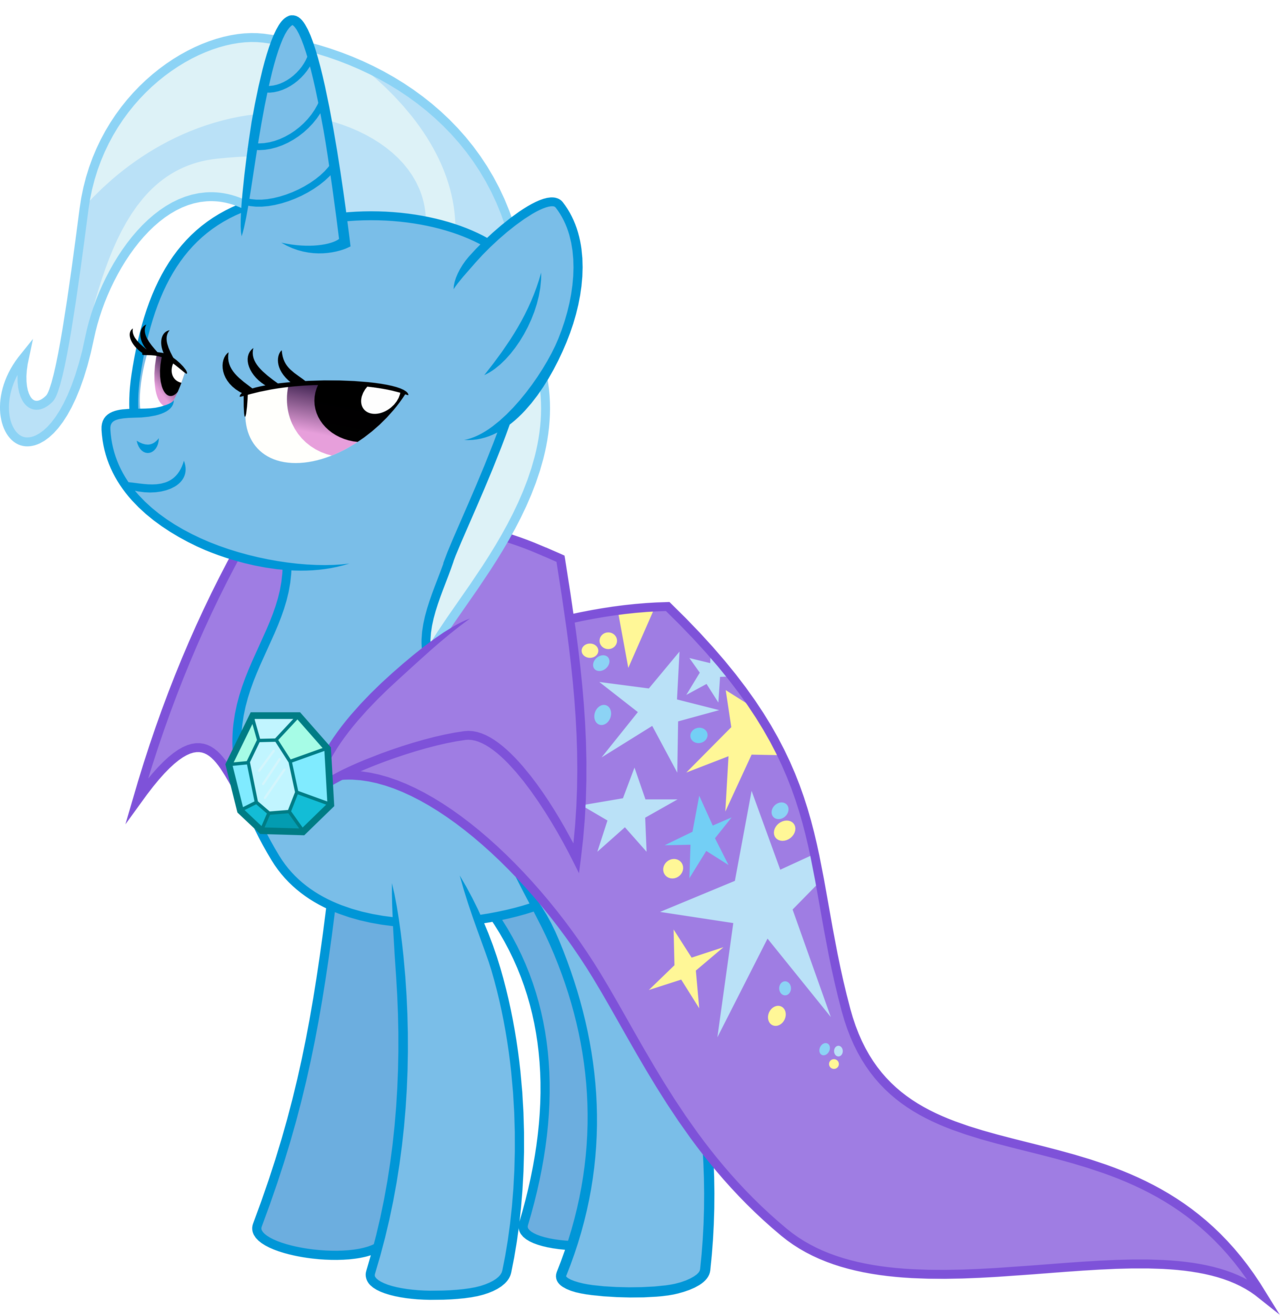 tgap_trixie_vector___was_there_ever_any_